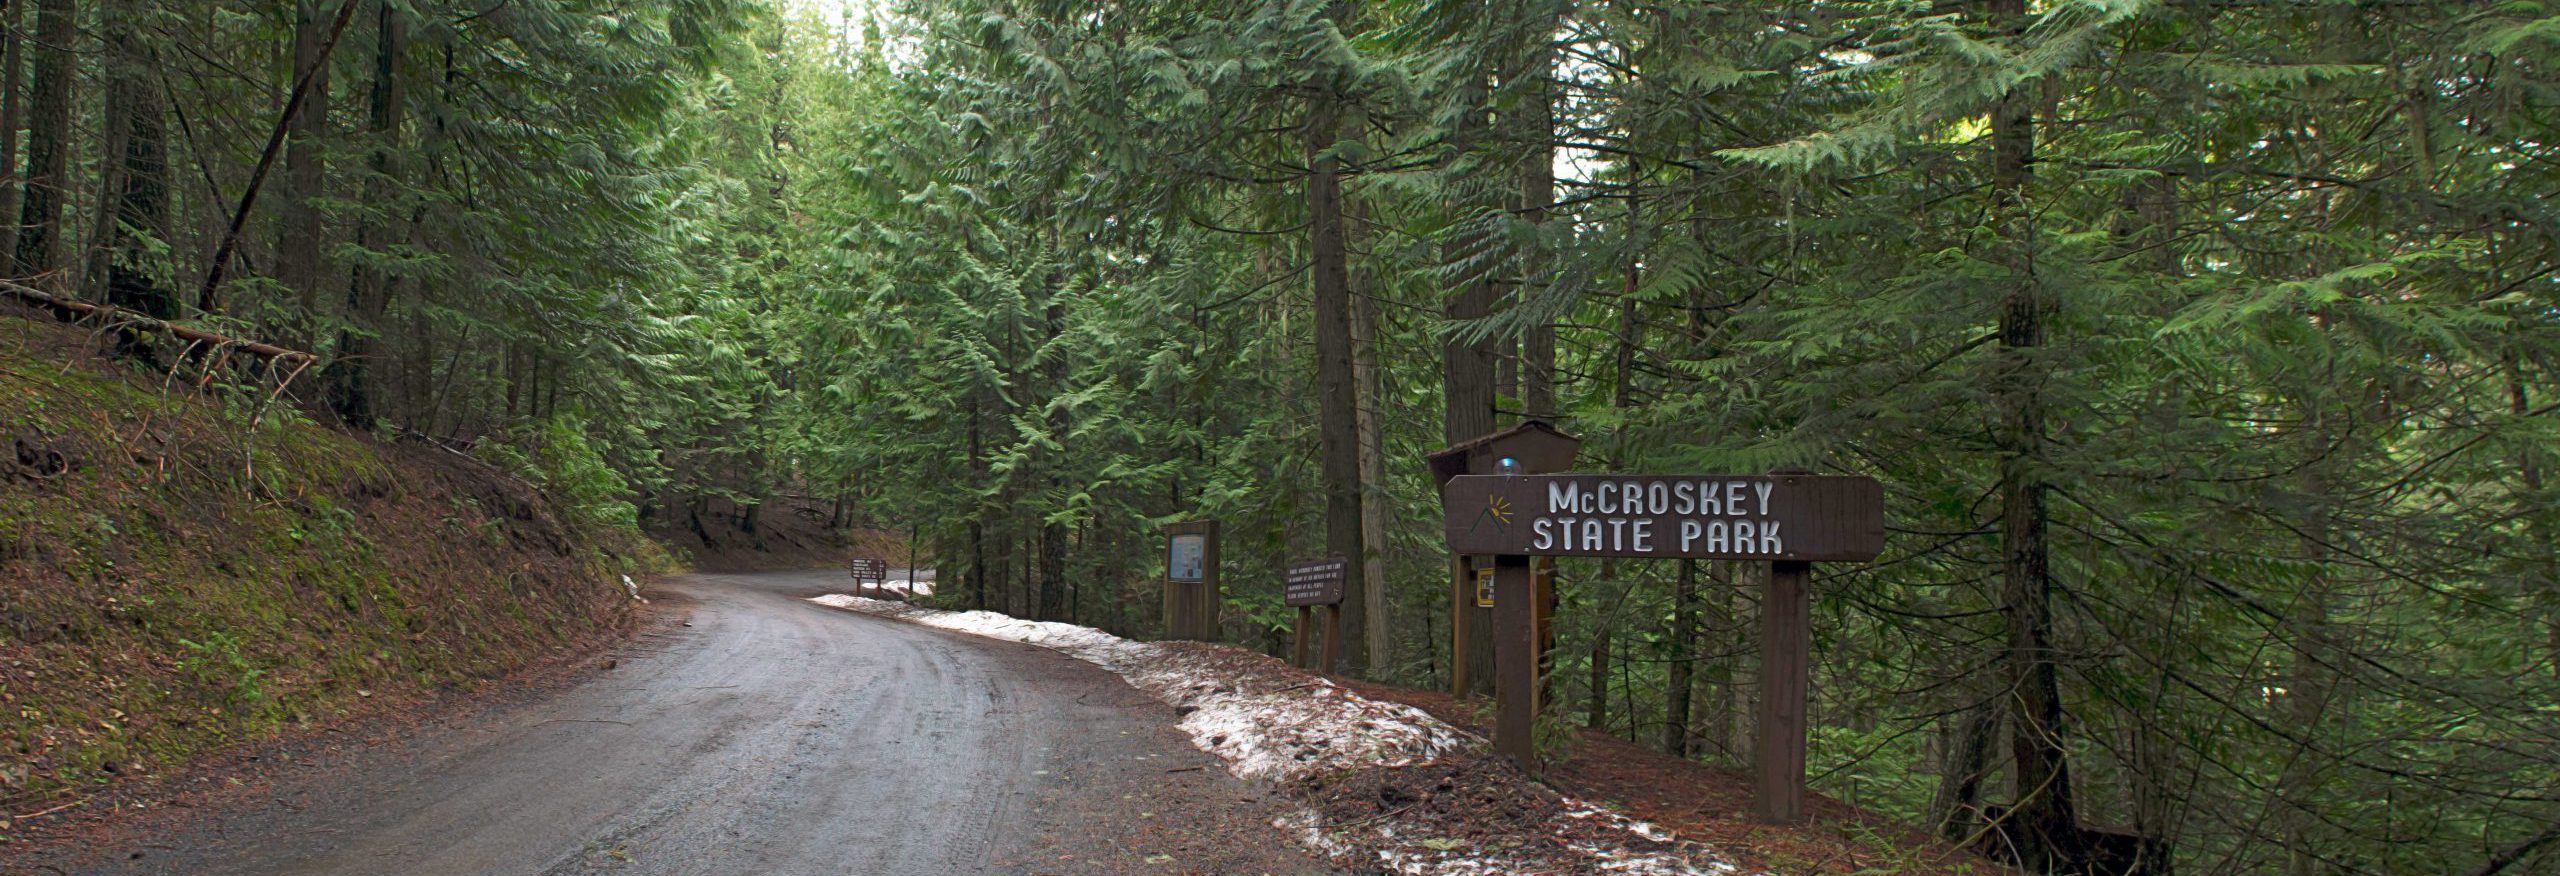 McCroskey State Park | Department of Parks and Recreation